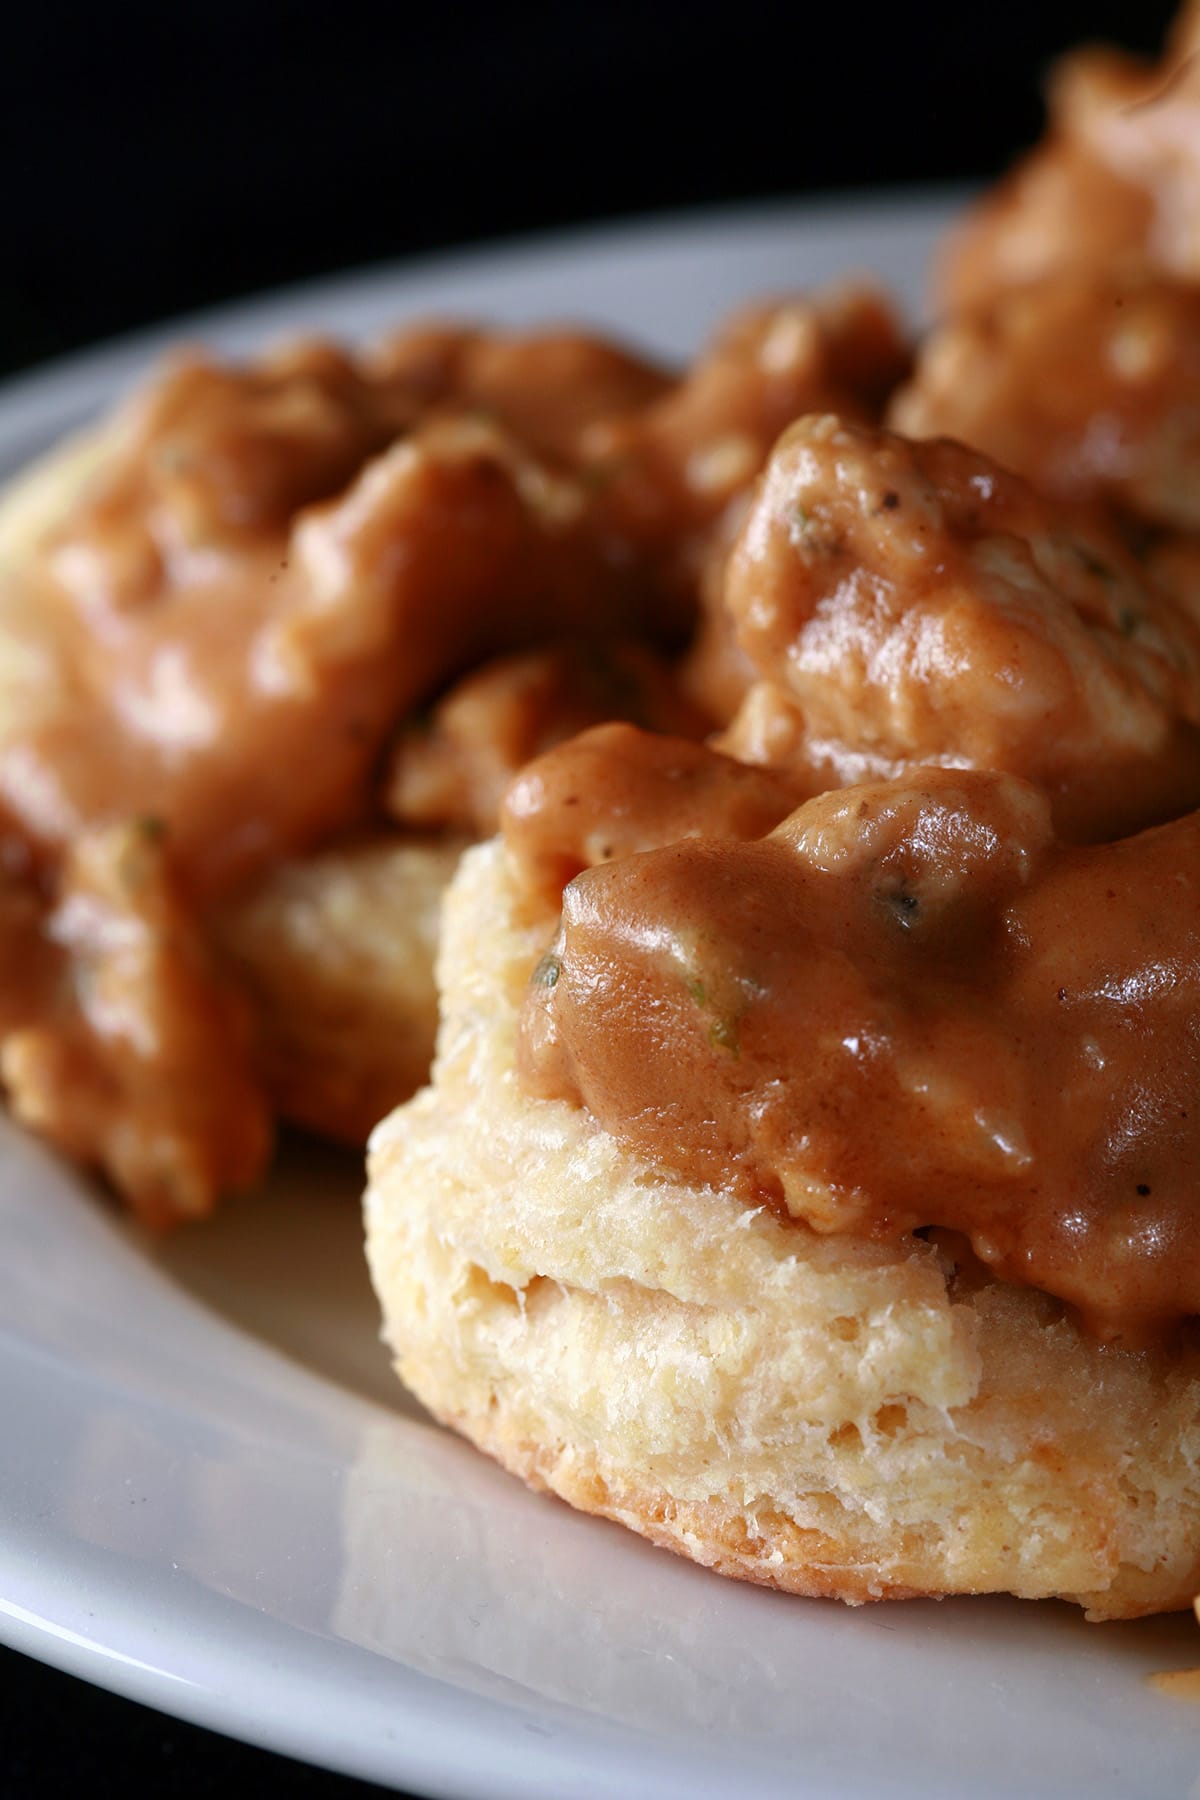 A serving of biscuits and gravy, on a small plate.